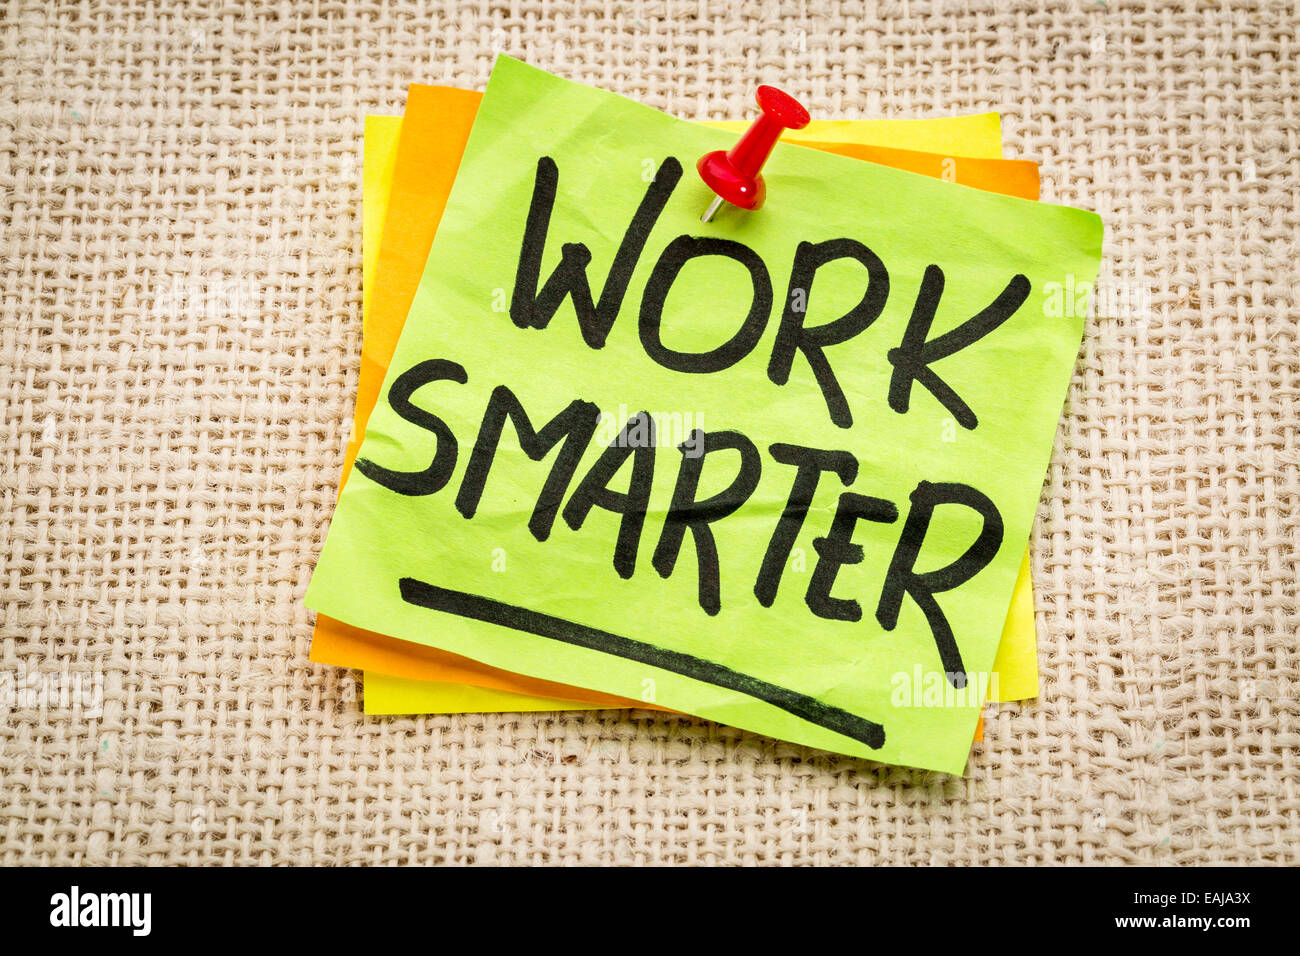 work smarter reminder on a green sticky note against burlap canvas Stock Photo